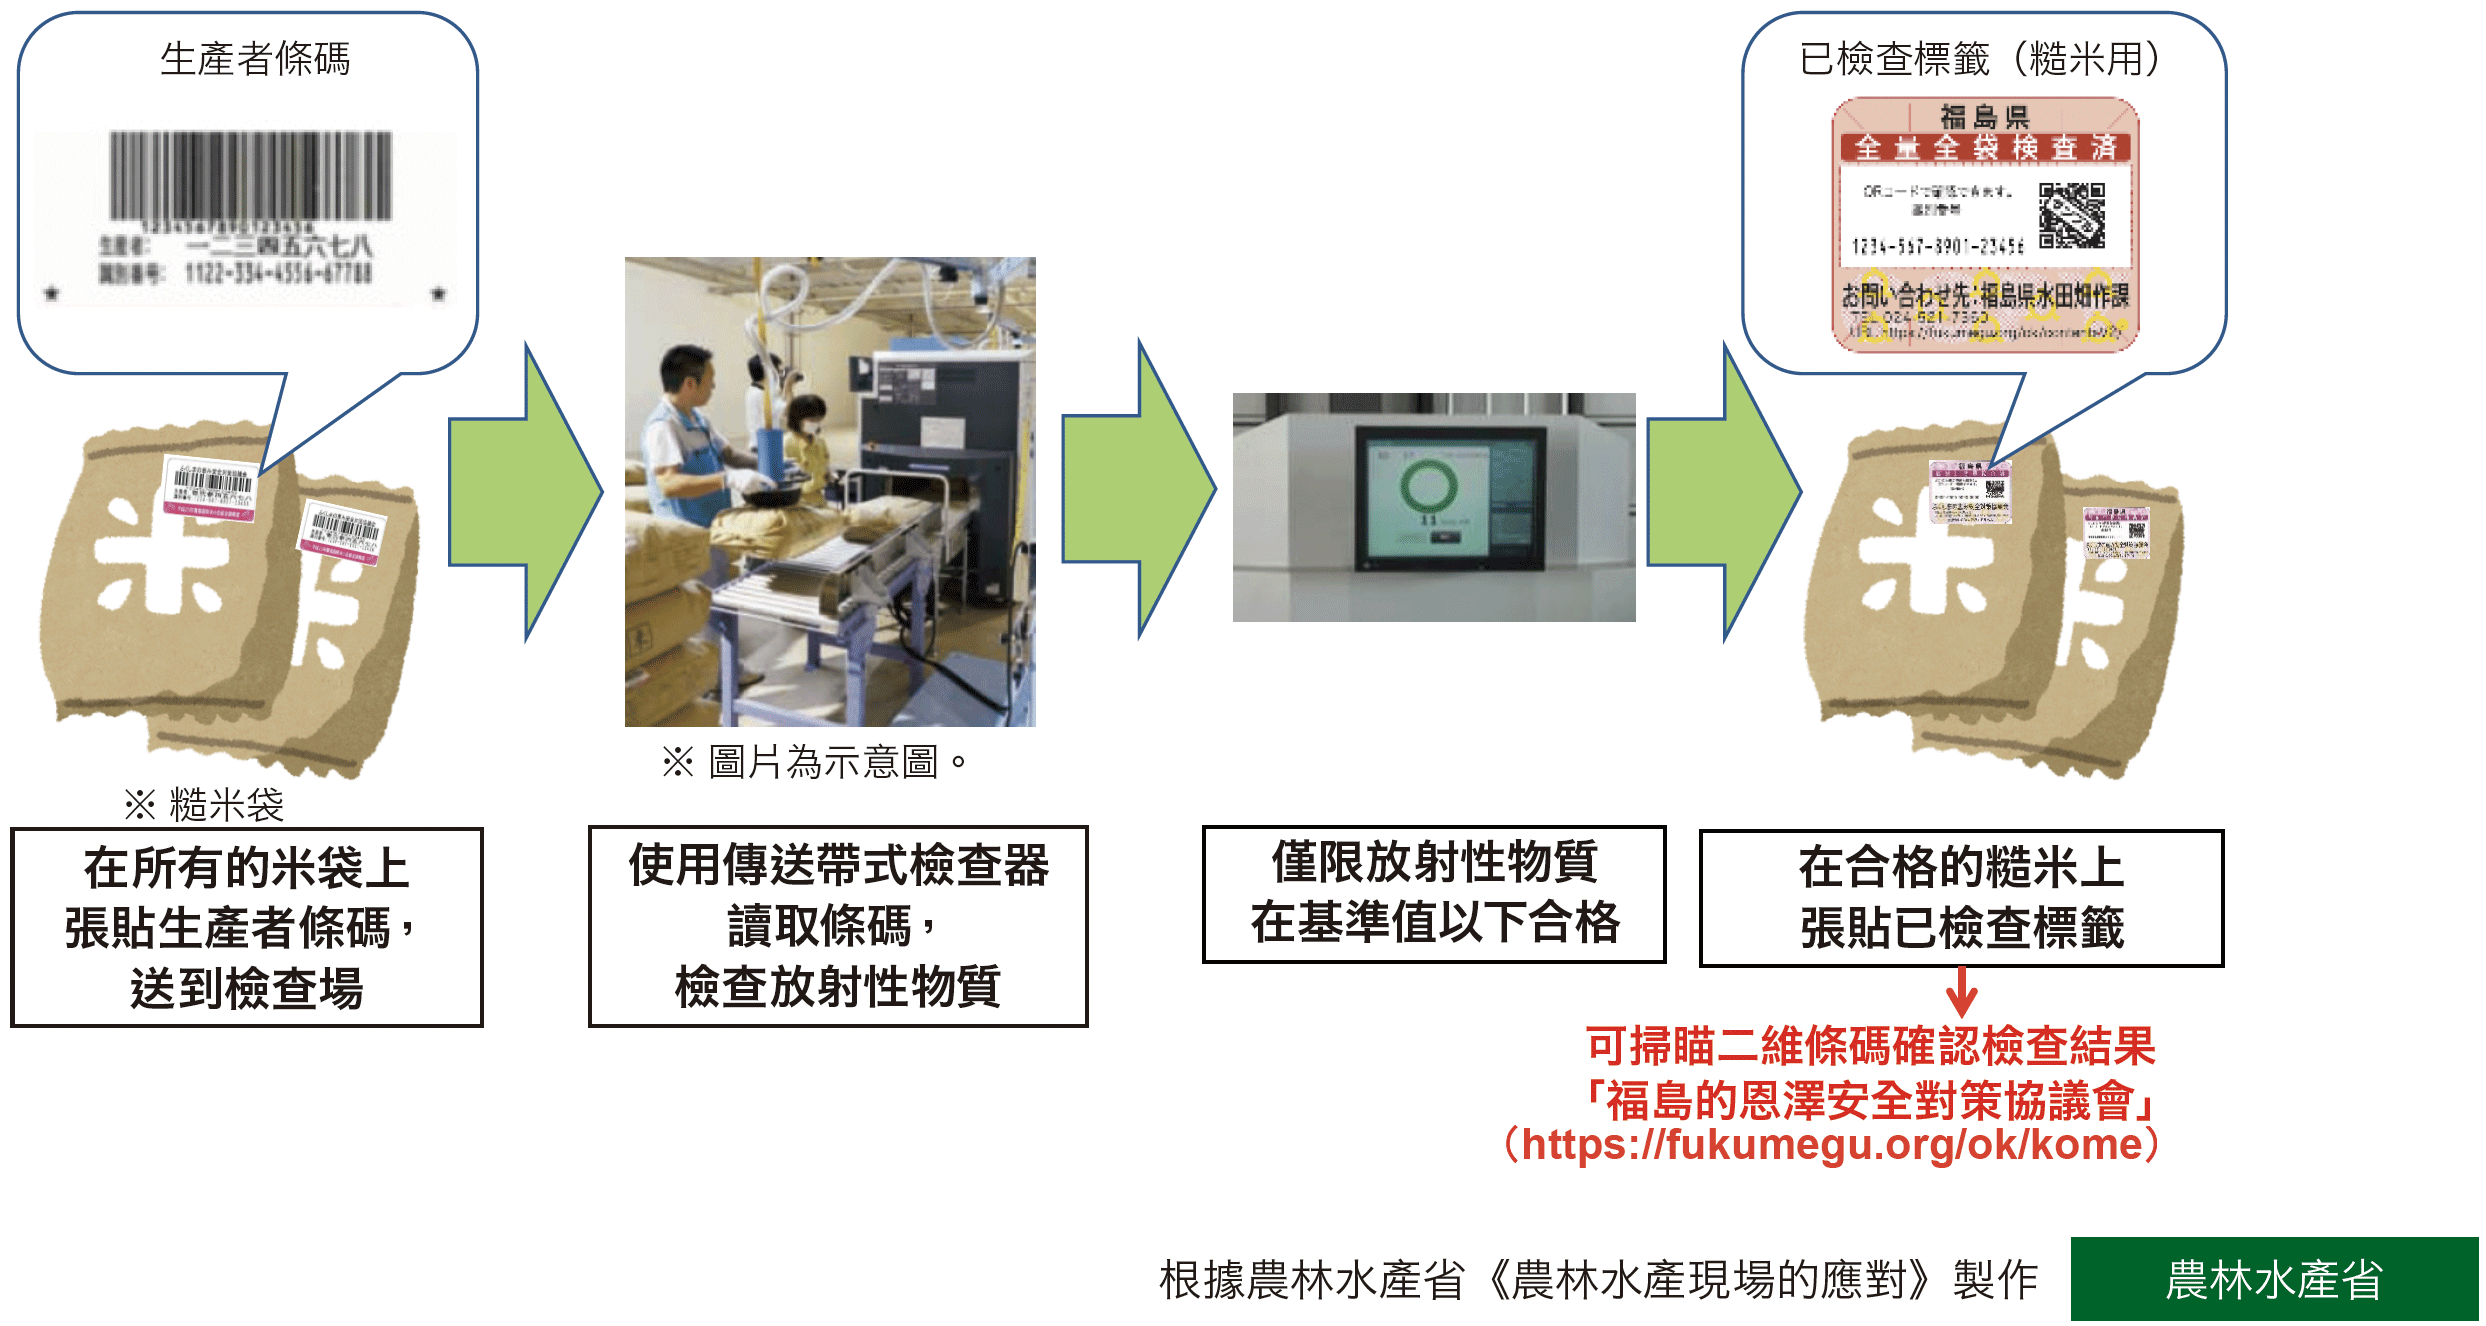 Radioactivity Inspection of the Full Volume of All Rice Bags by Fukushima Prefecture